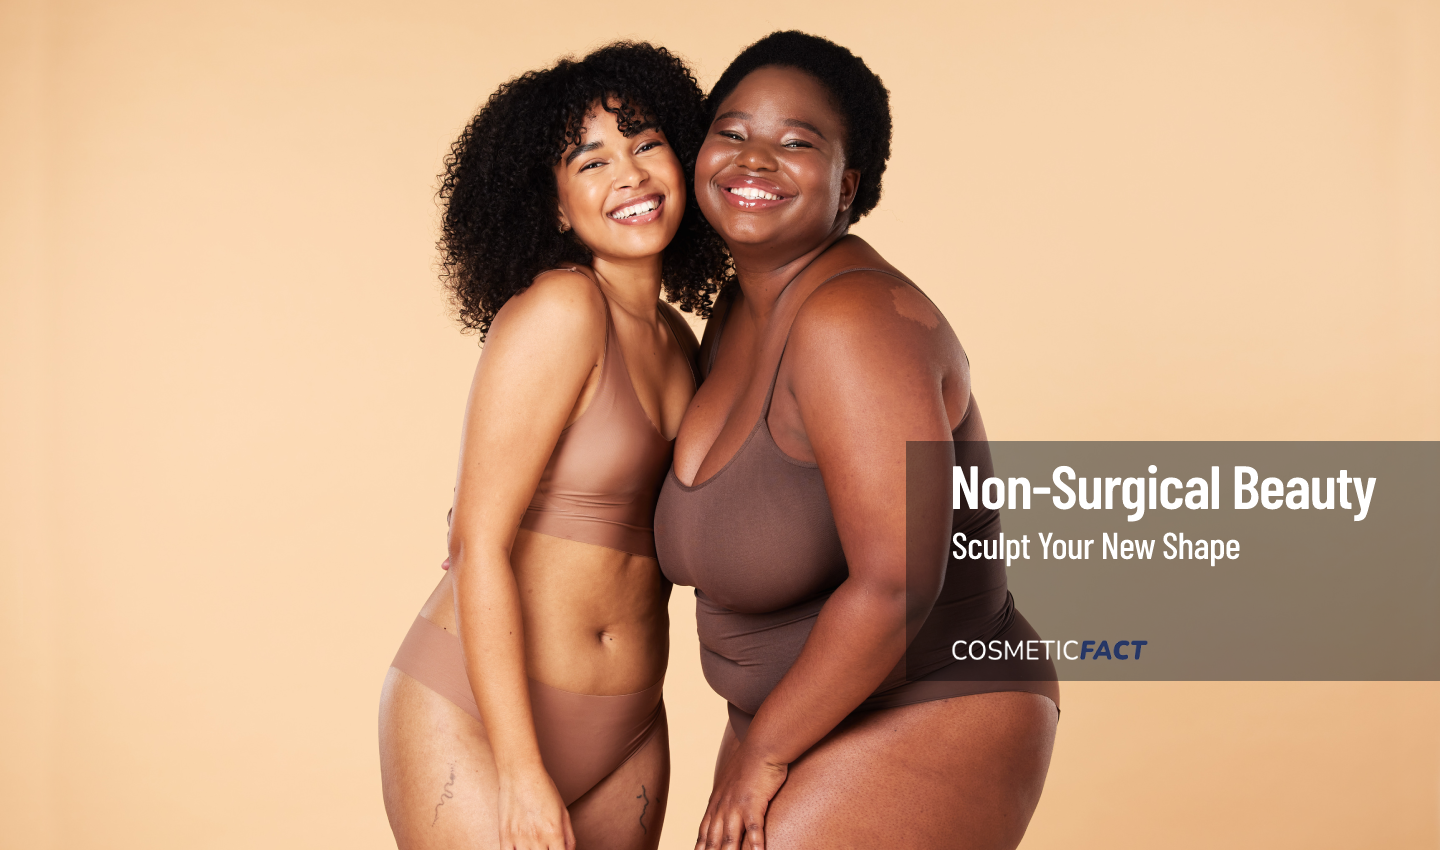 Two happy women, one slim and the other with a fuller figure, show off their bodies after body contouring treatments.